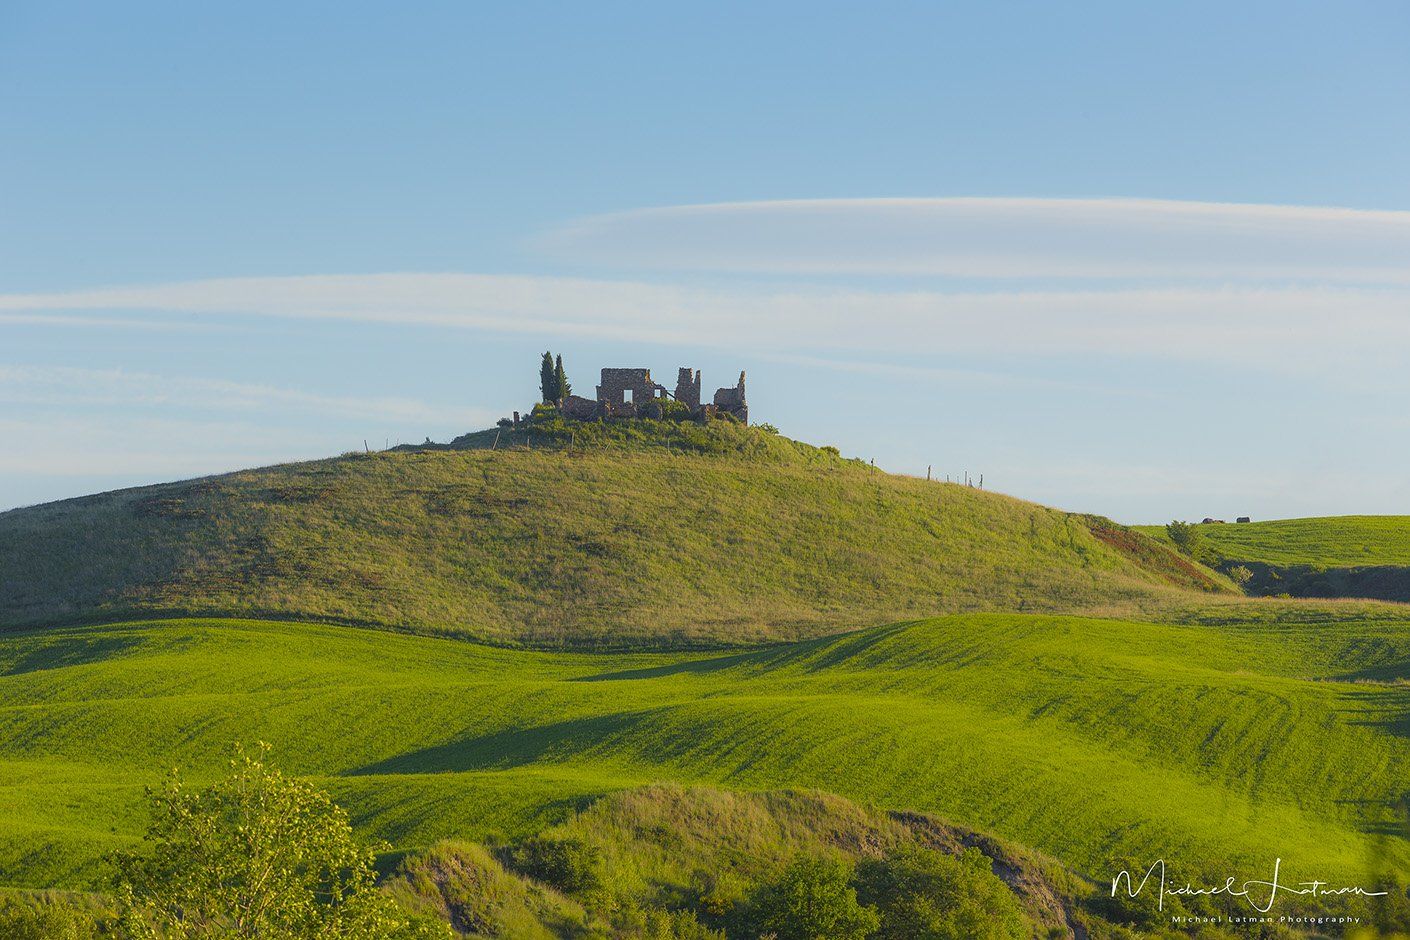 tuscany,italia,spring,green,hill,house, old, destroyed,grass,sky, Michael Latman